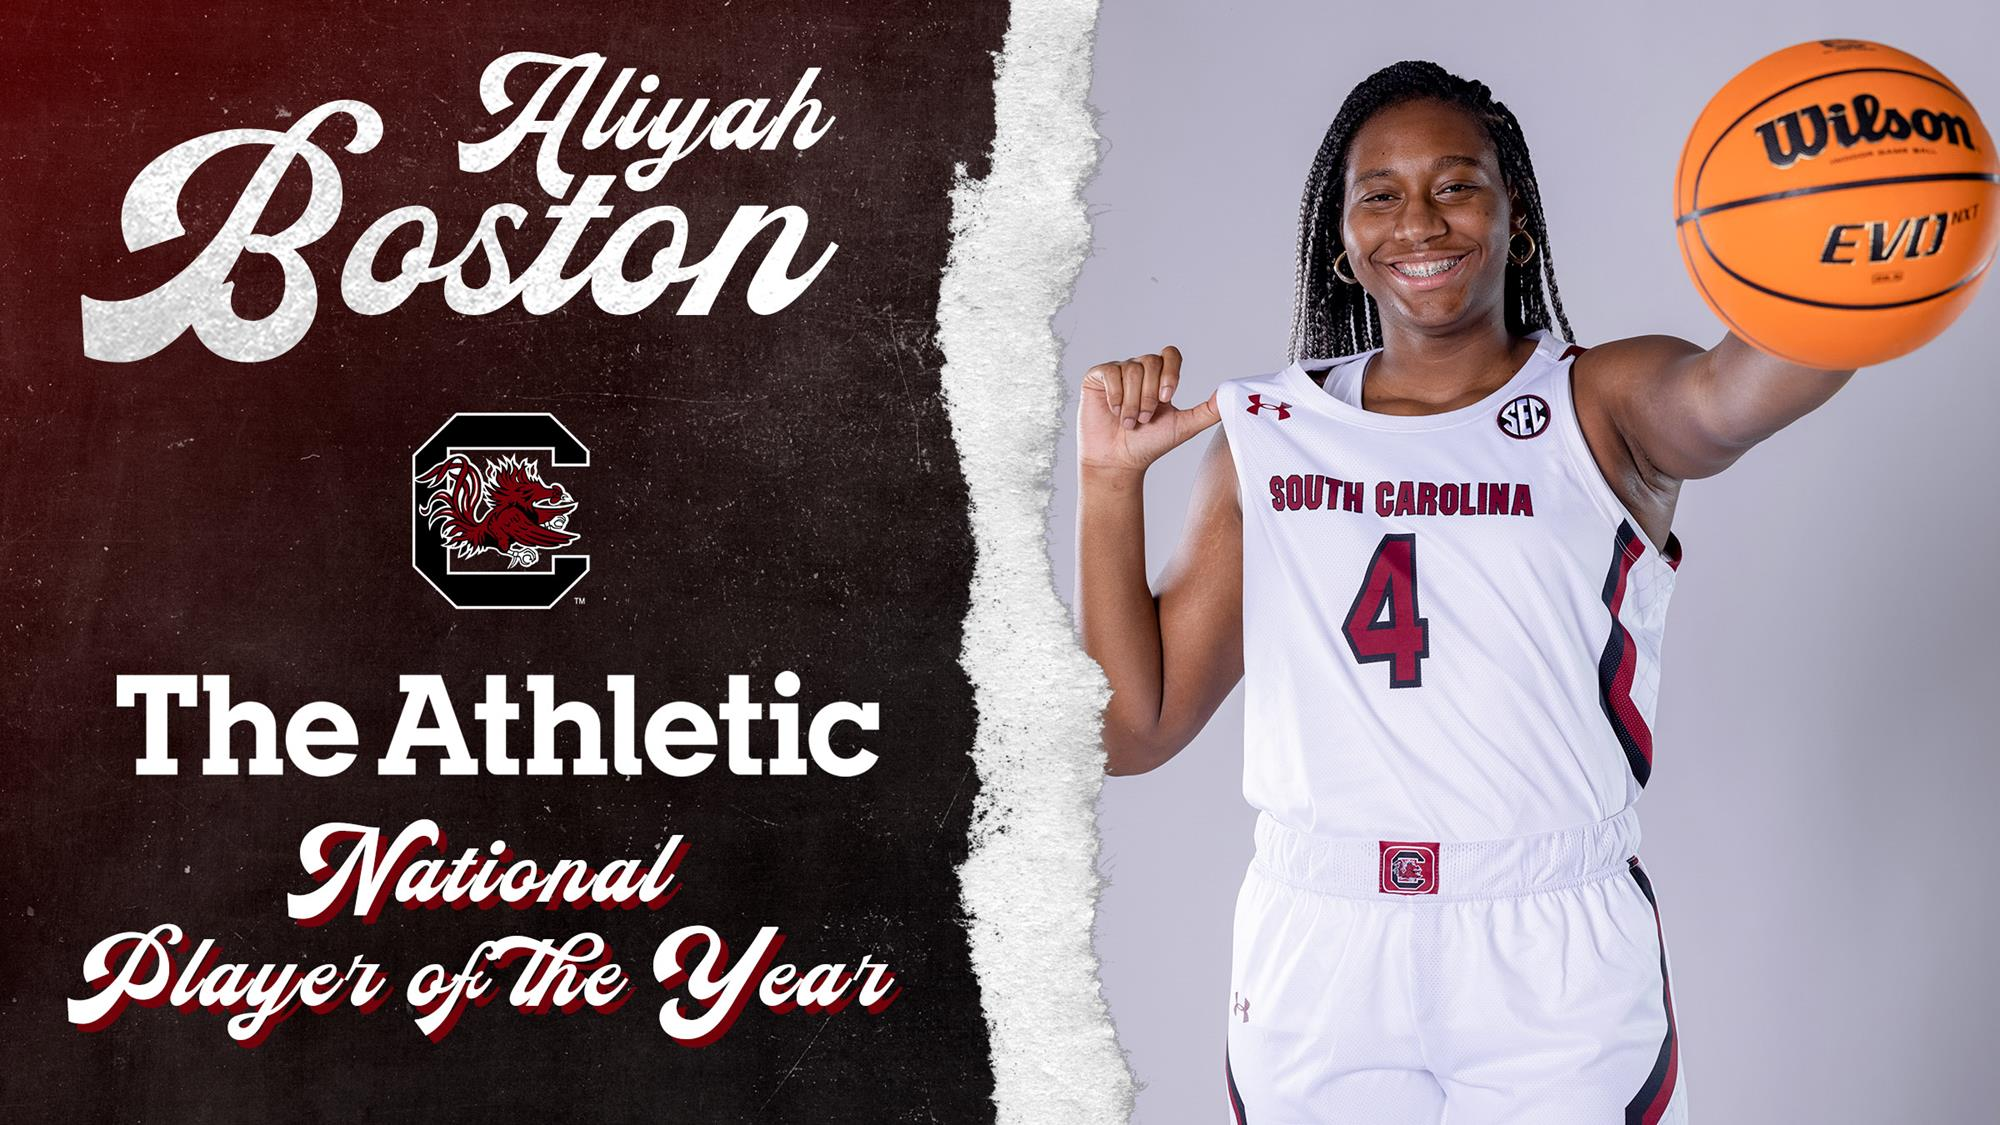 Boston Named The Athletic National Player of the Year